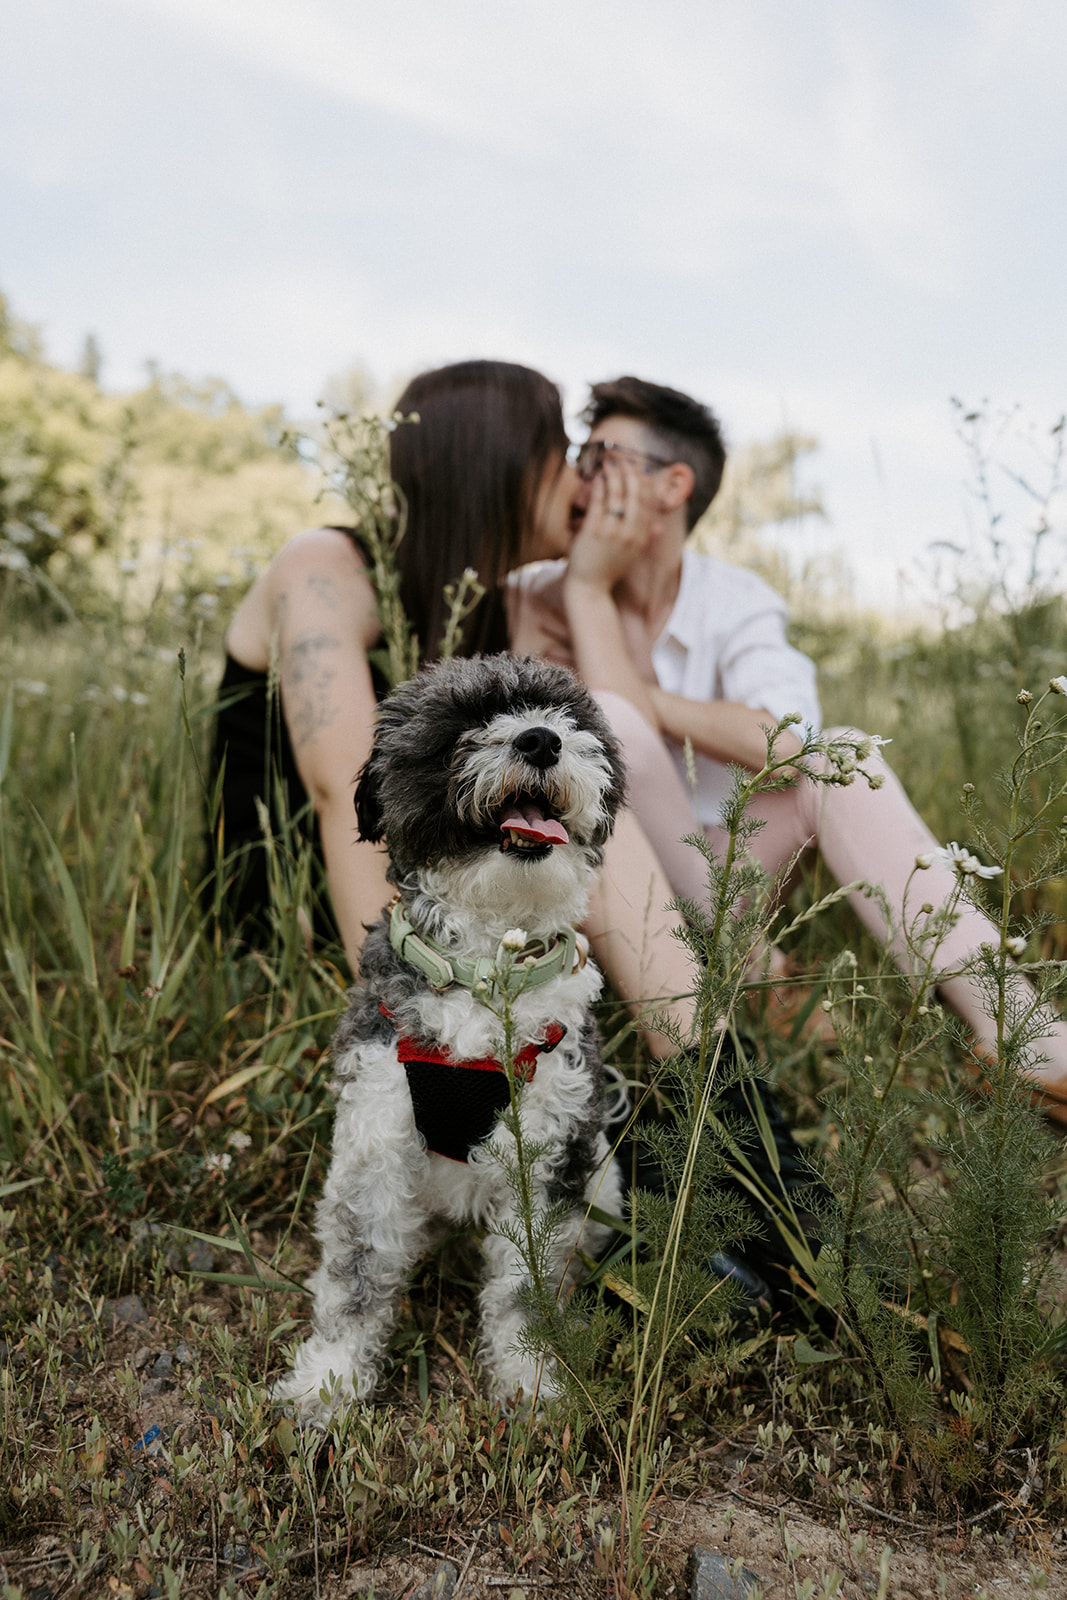 Two people sitting on the grass kissing while the dog sits in front of them.